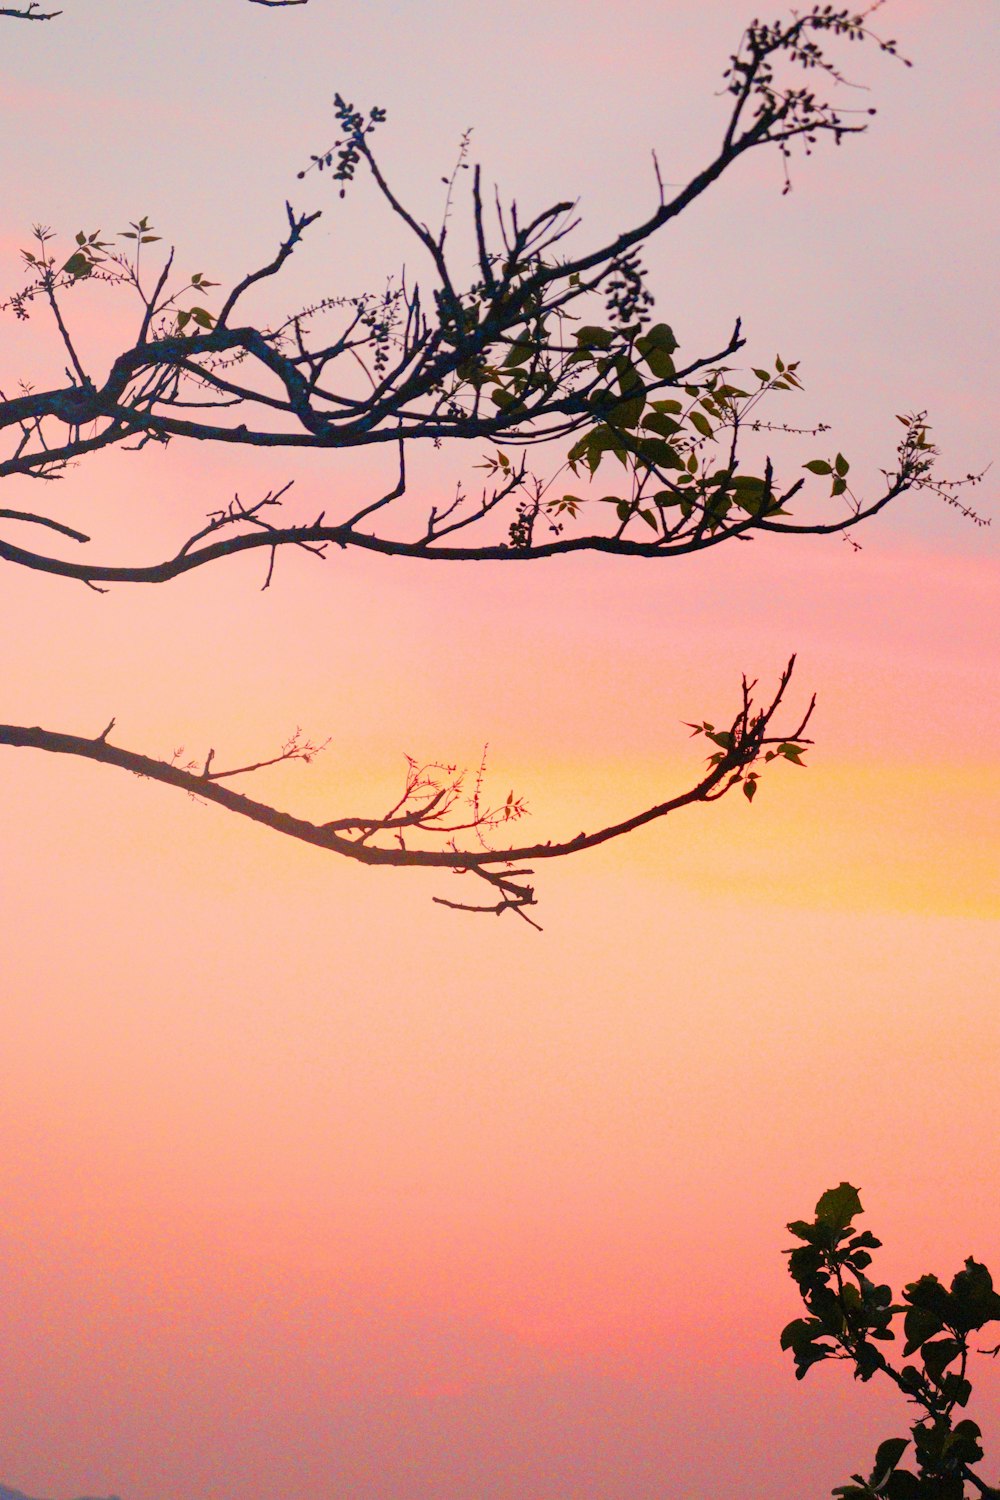 a bird is perched on a tree branch as the sun sets